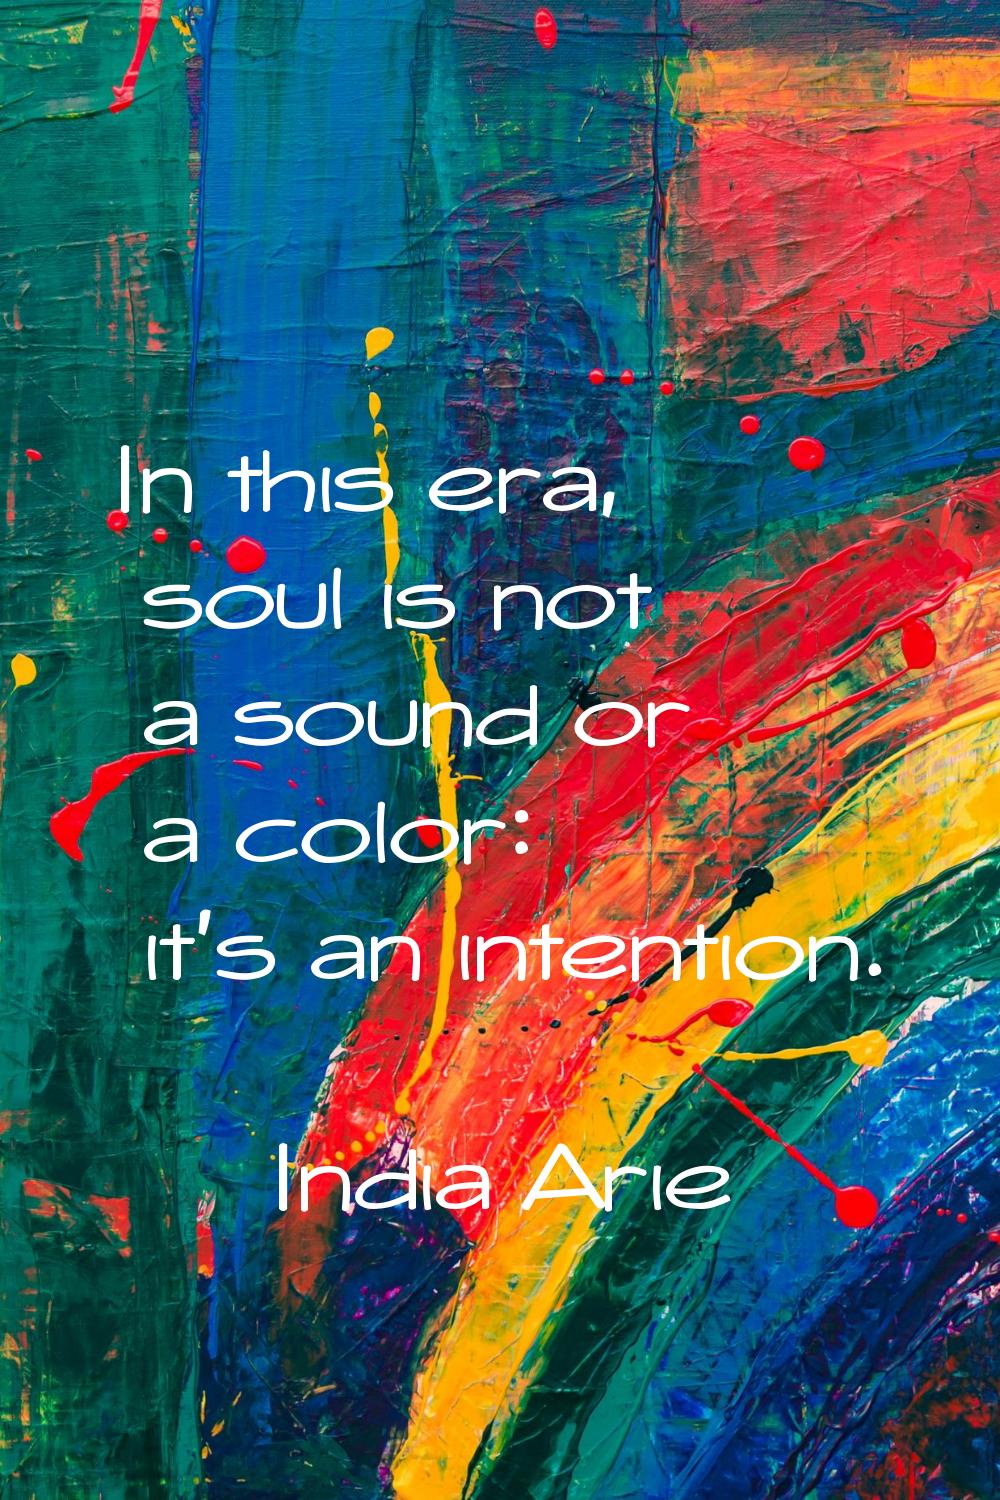 In this era, soul is not a sound or a color: it's an intention.